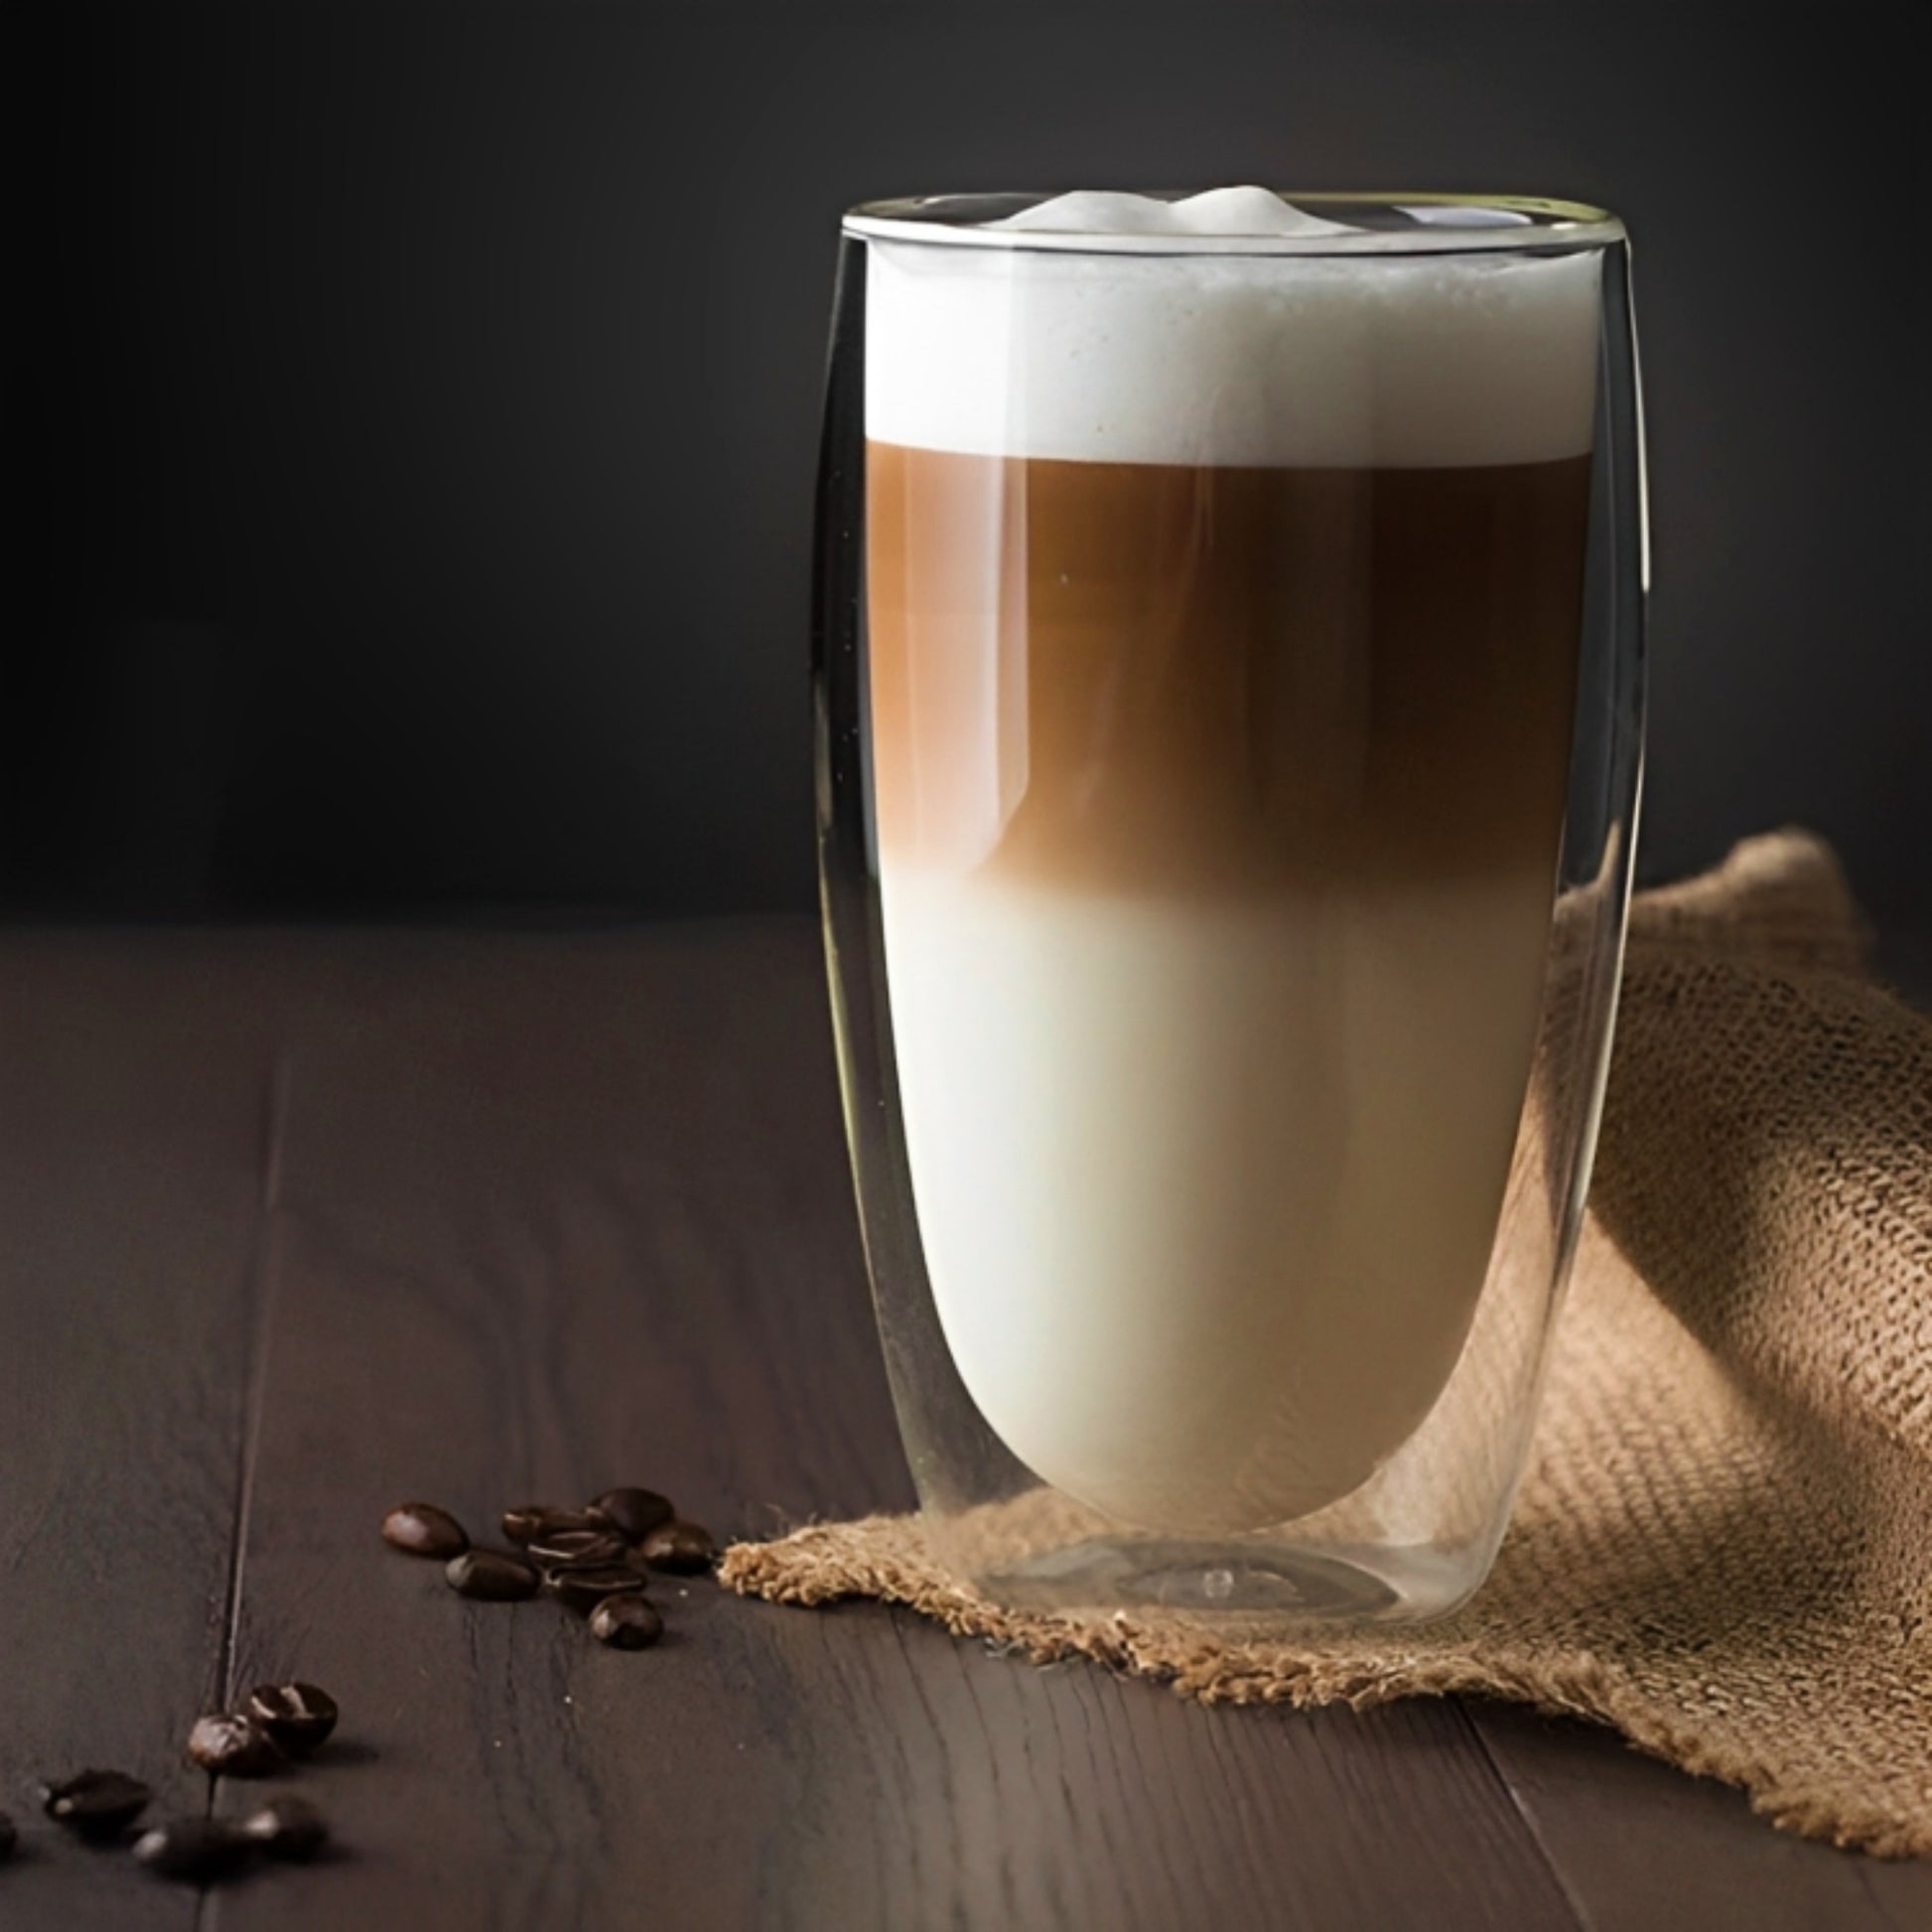 A single double walled glass with layered coffee in it